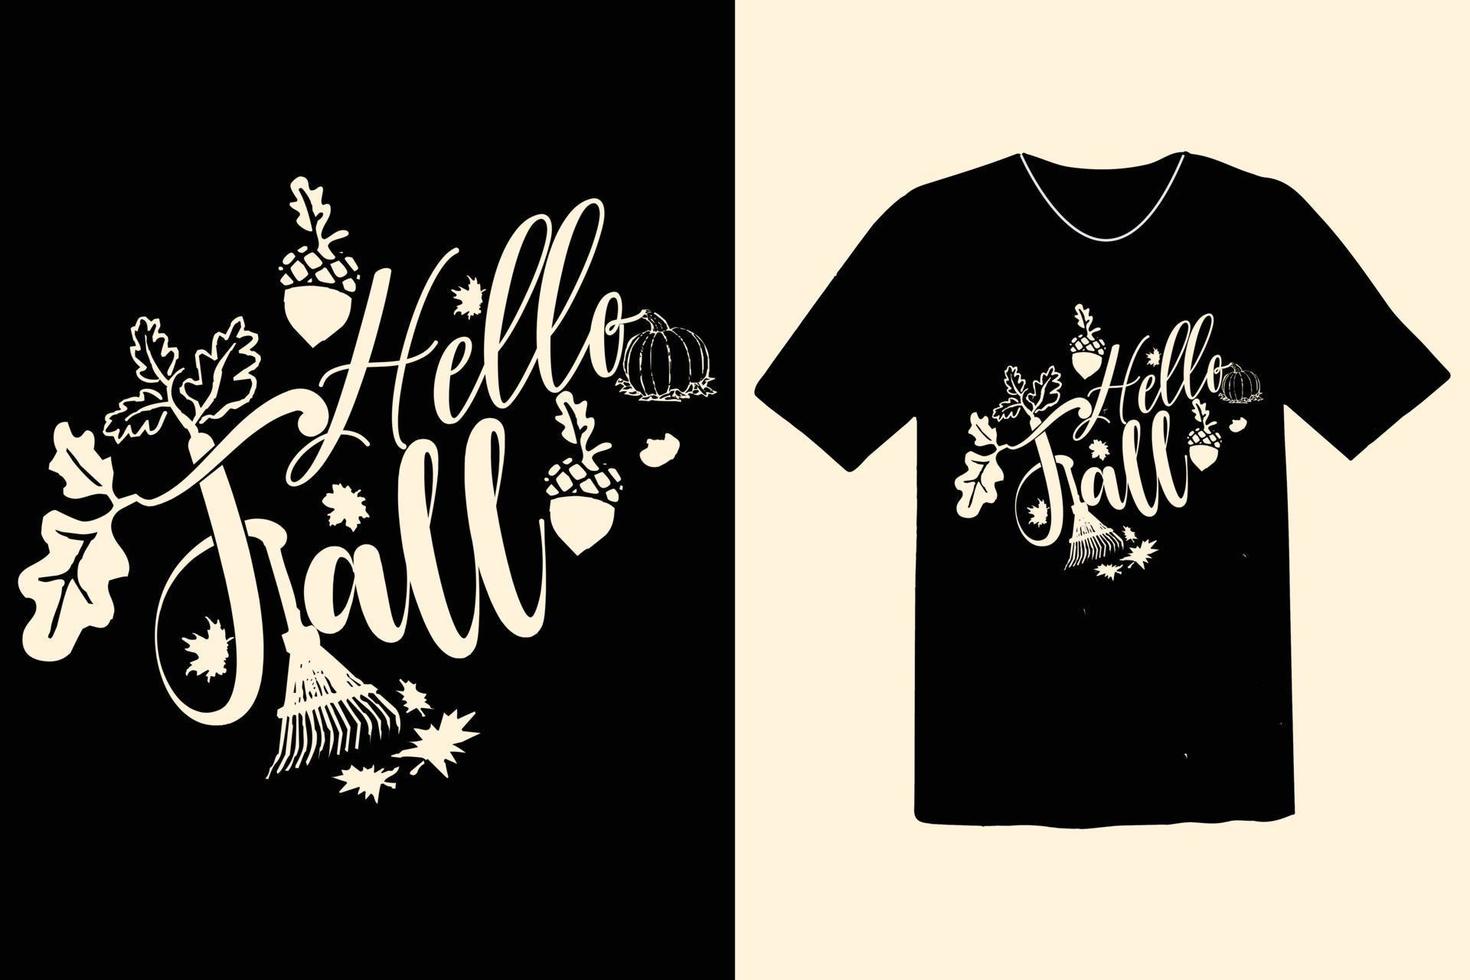 Fall design for free design .get it soon. vector